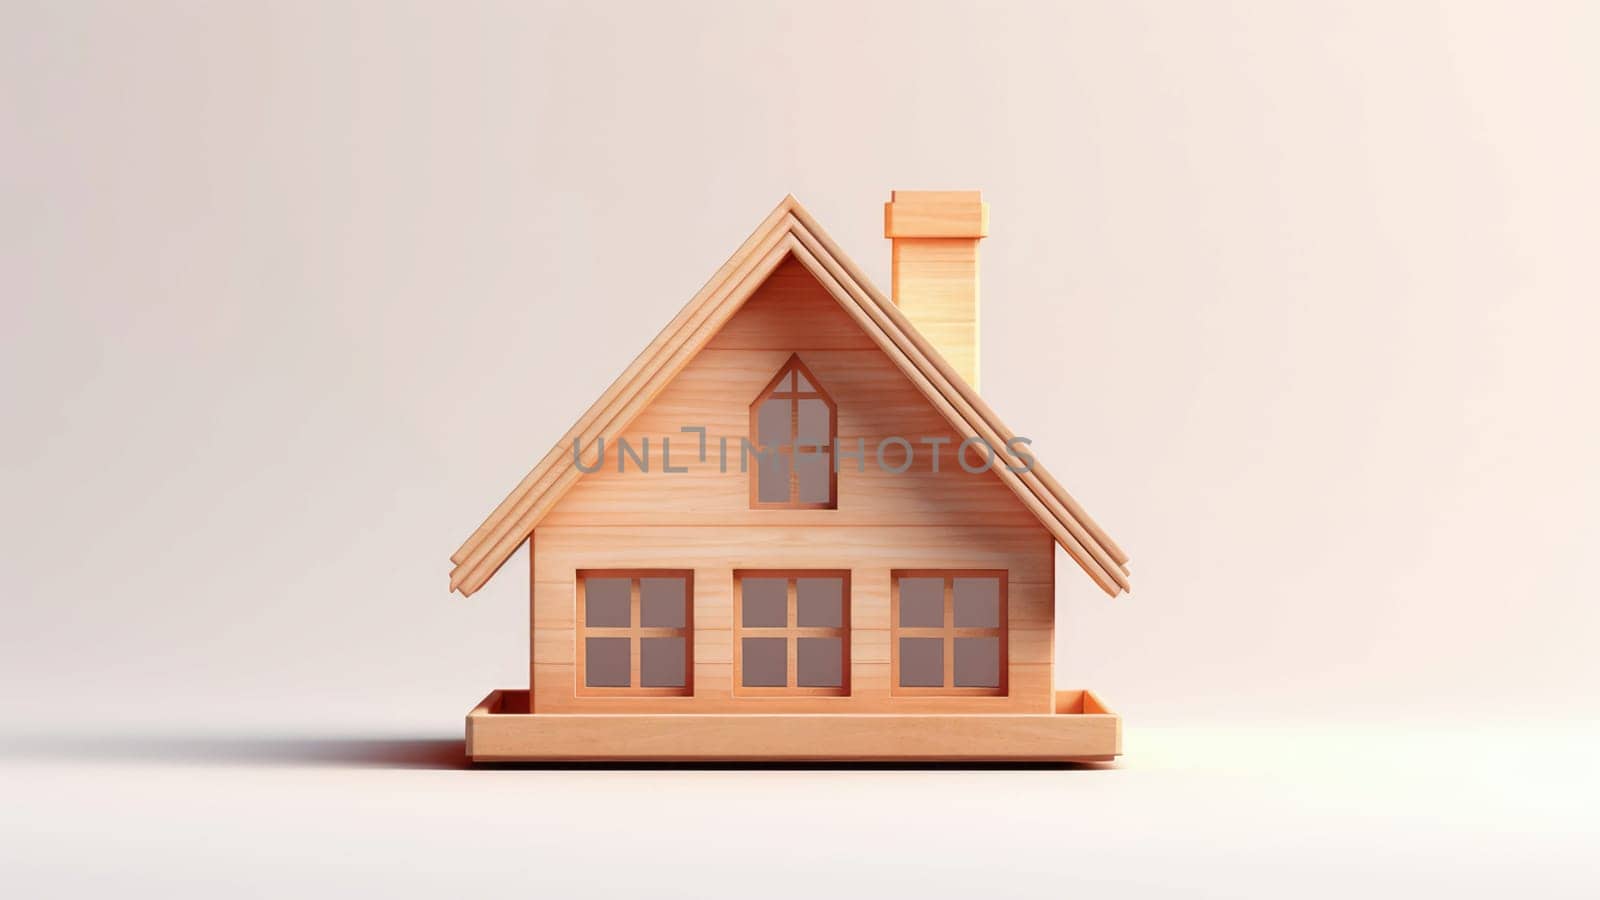 3D Rendering of a wooden model of a house on a wooden base, suggesting the potential for creativity and imagination in art.